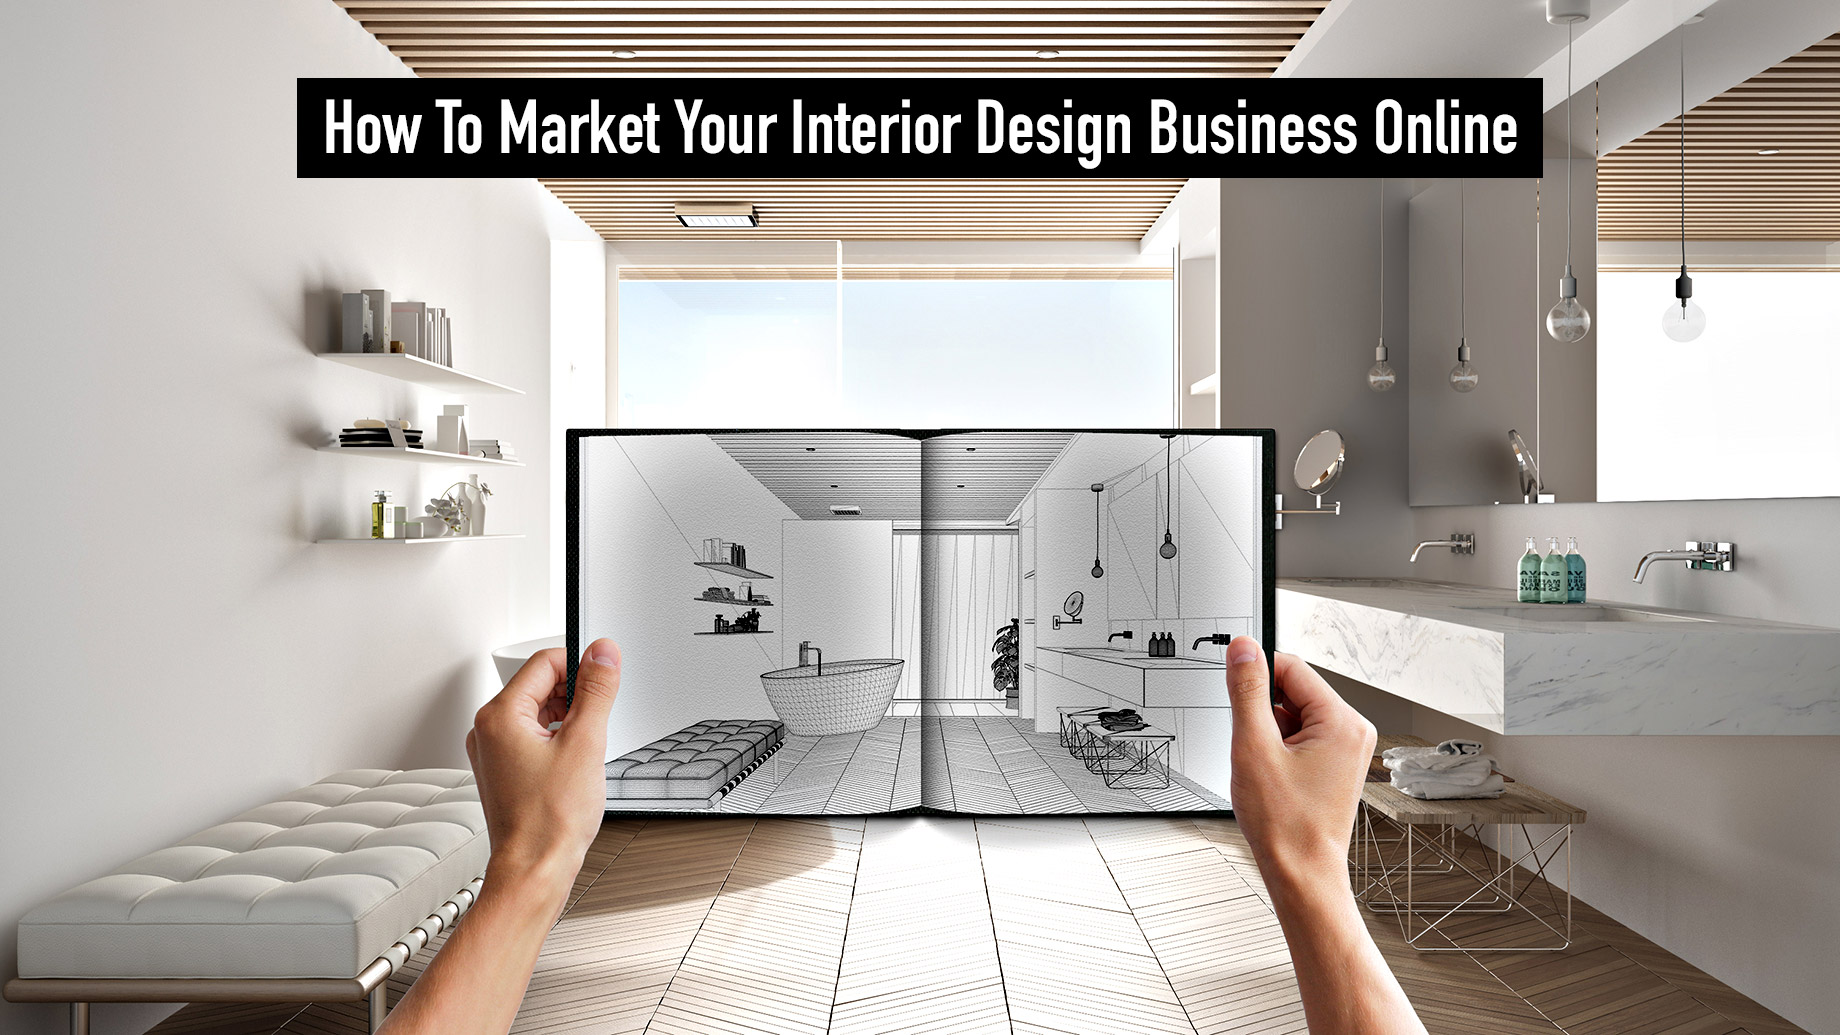 How To Market Your Interior Design Business Online